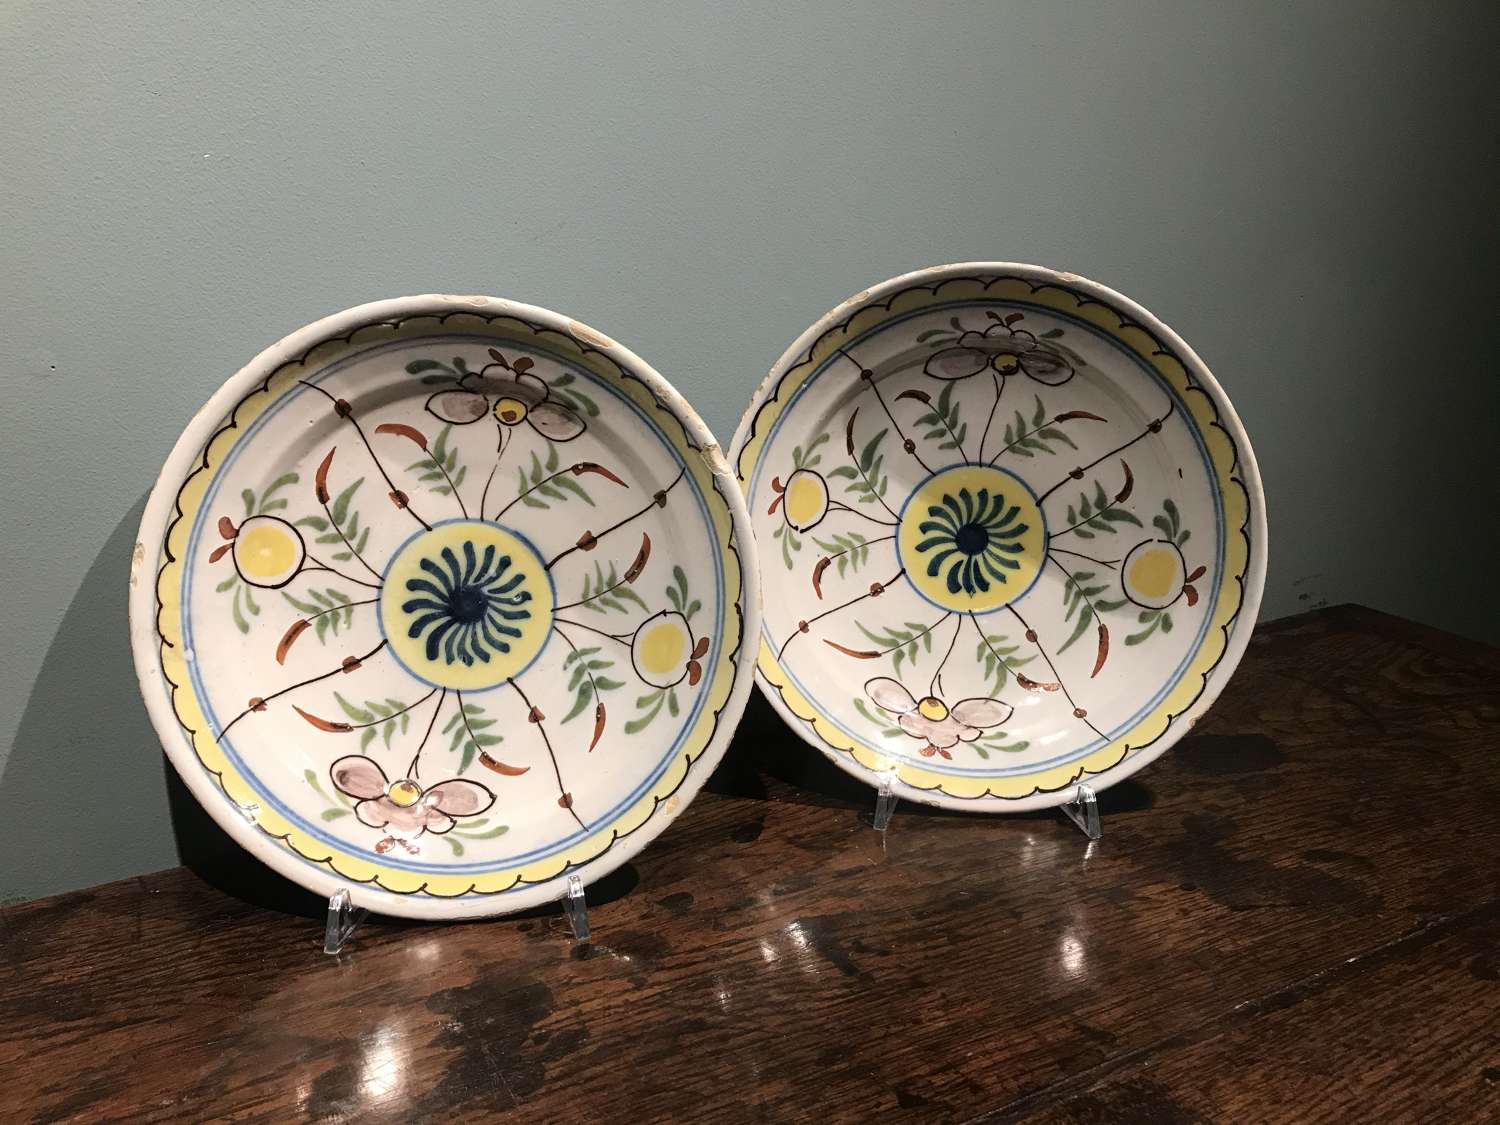 Pair of 18th c. Dutch Delft polychrome dishes